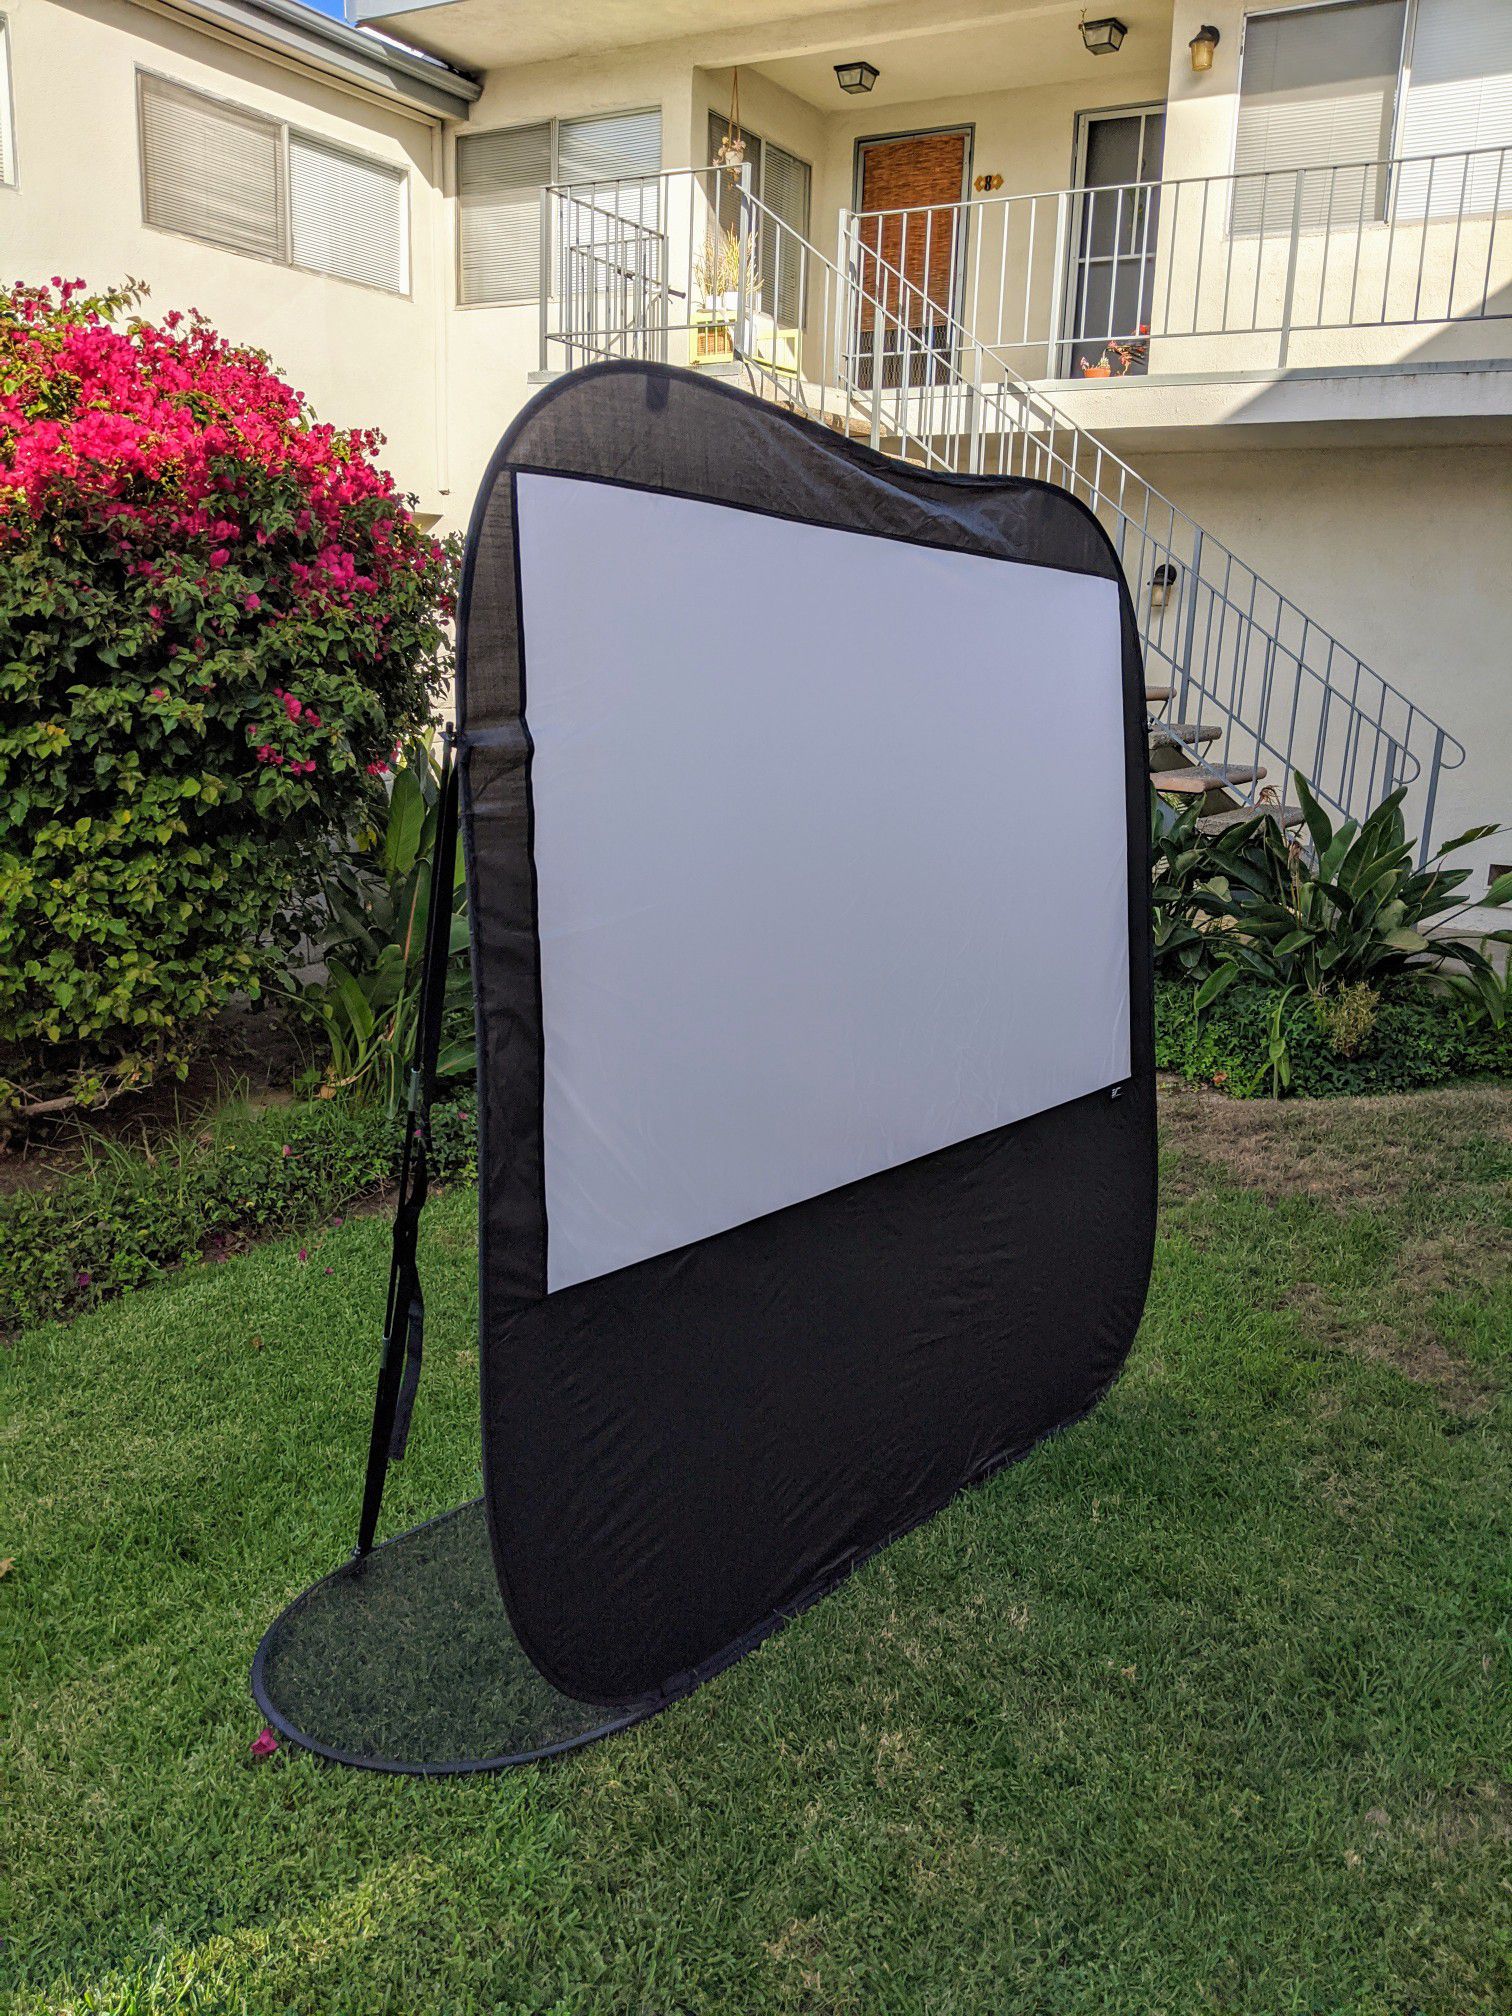 Good for backyard and camping! 84 inch (16:9) Portable popup projector screen!